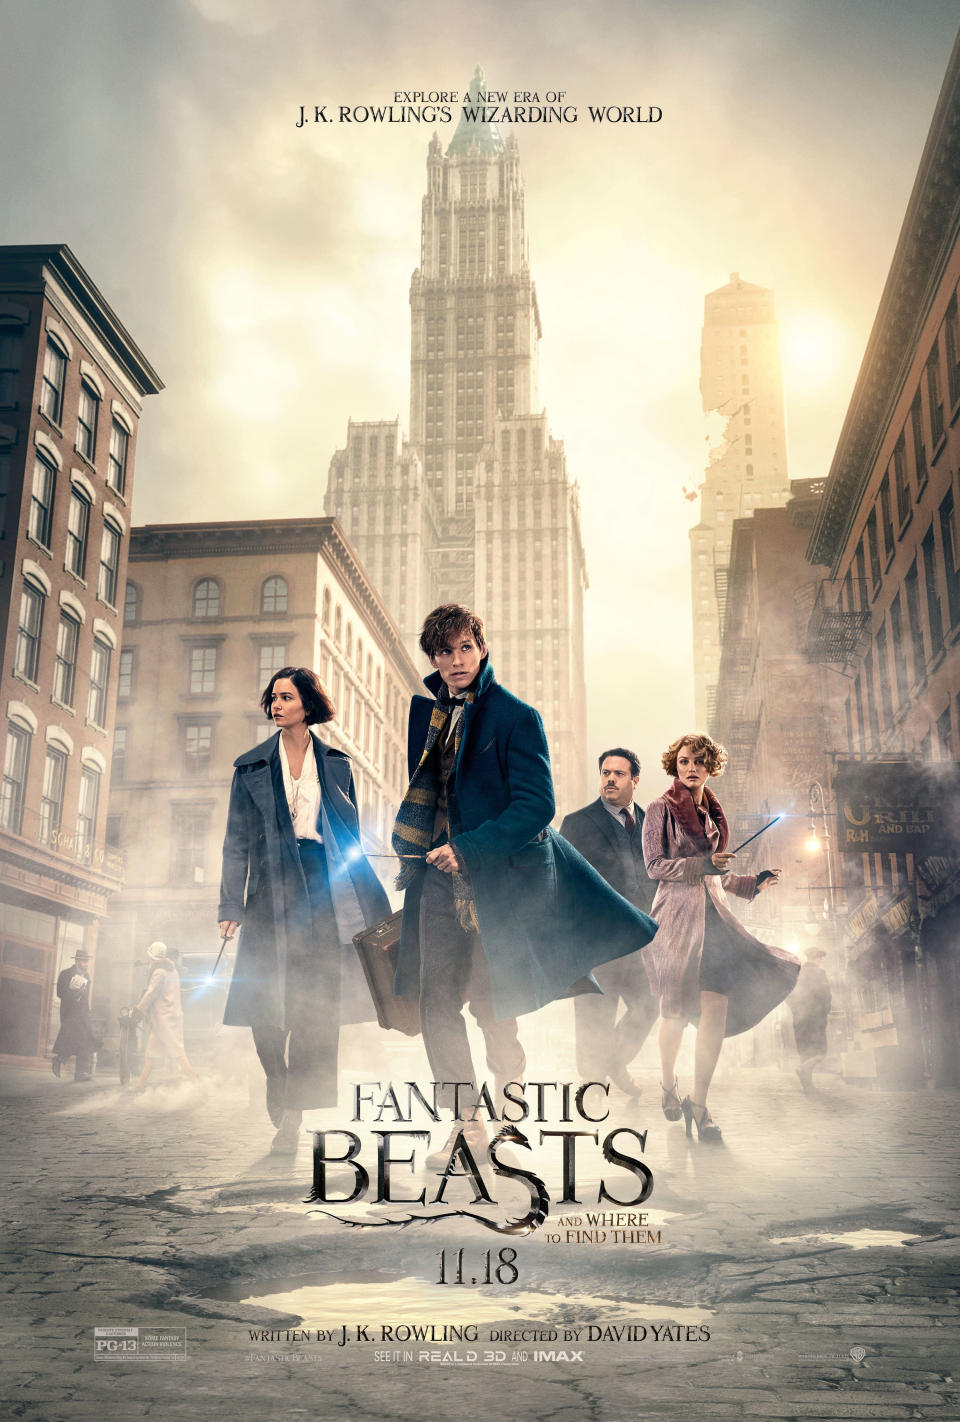 The US poster for Fantastic Beasts and Where to Find Them